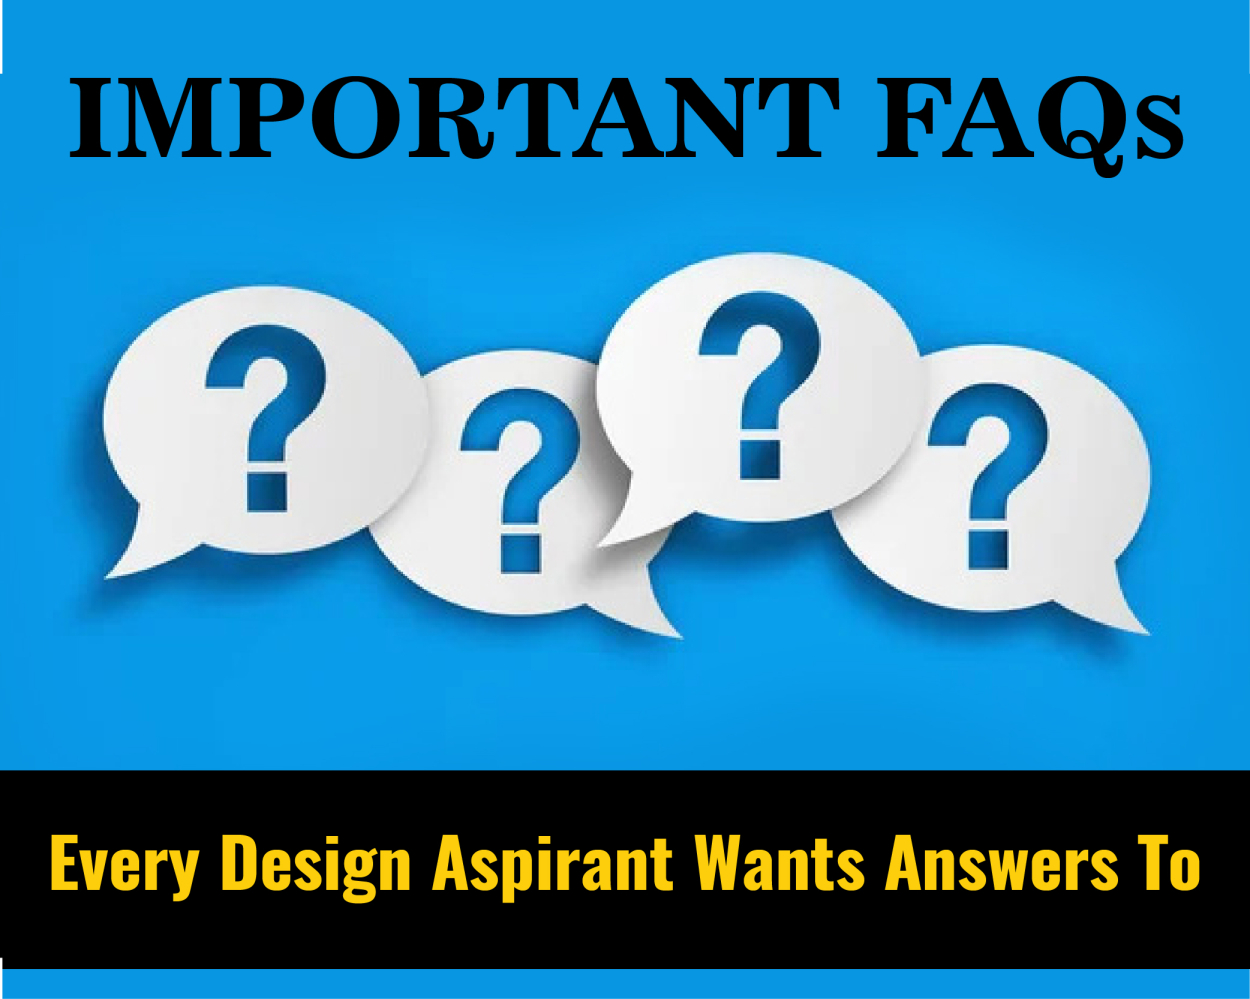 Important FAQs every Design Entrance Aspirant Wants Answers To